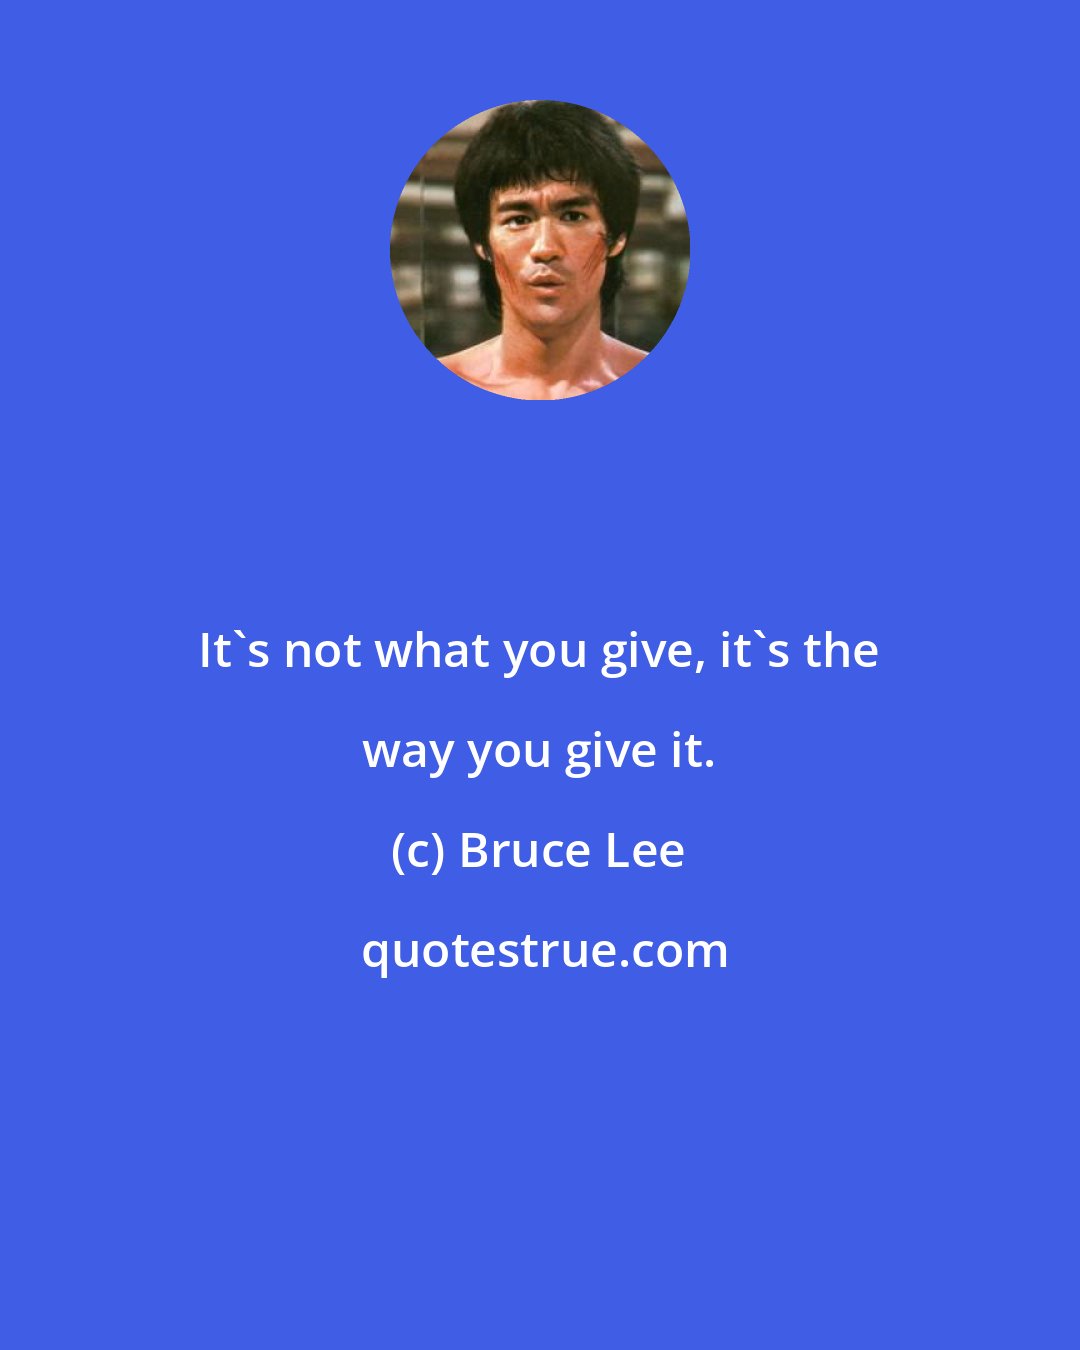 Bruce Lee: It's not what you give, it's the way you give it.